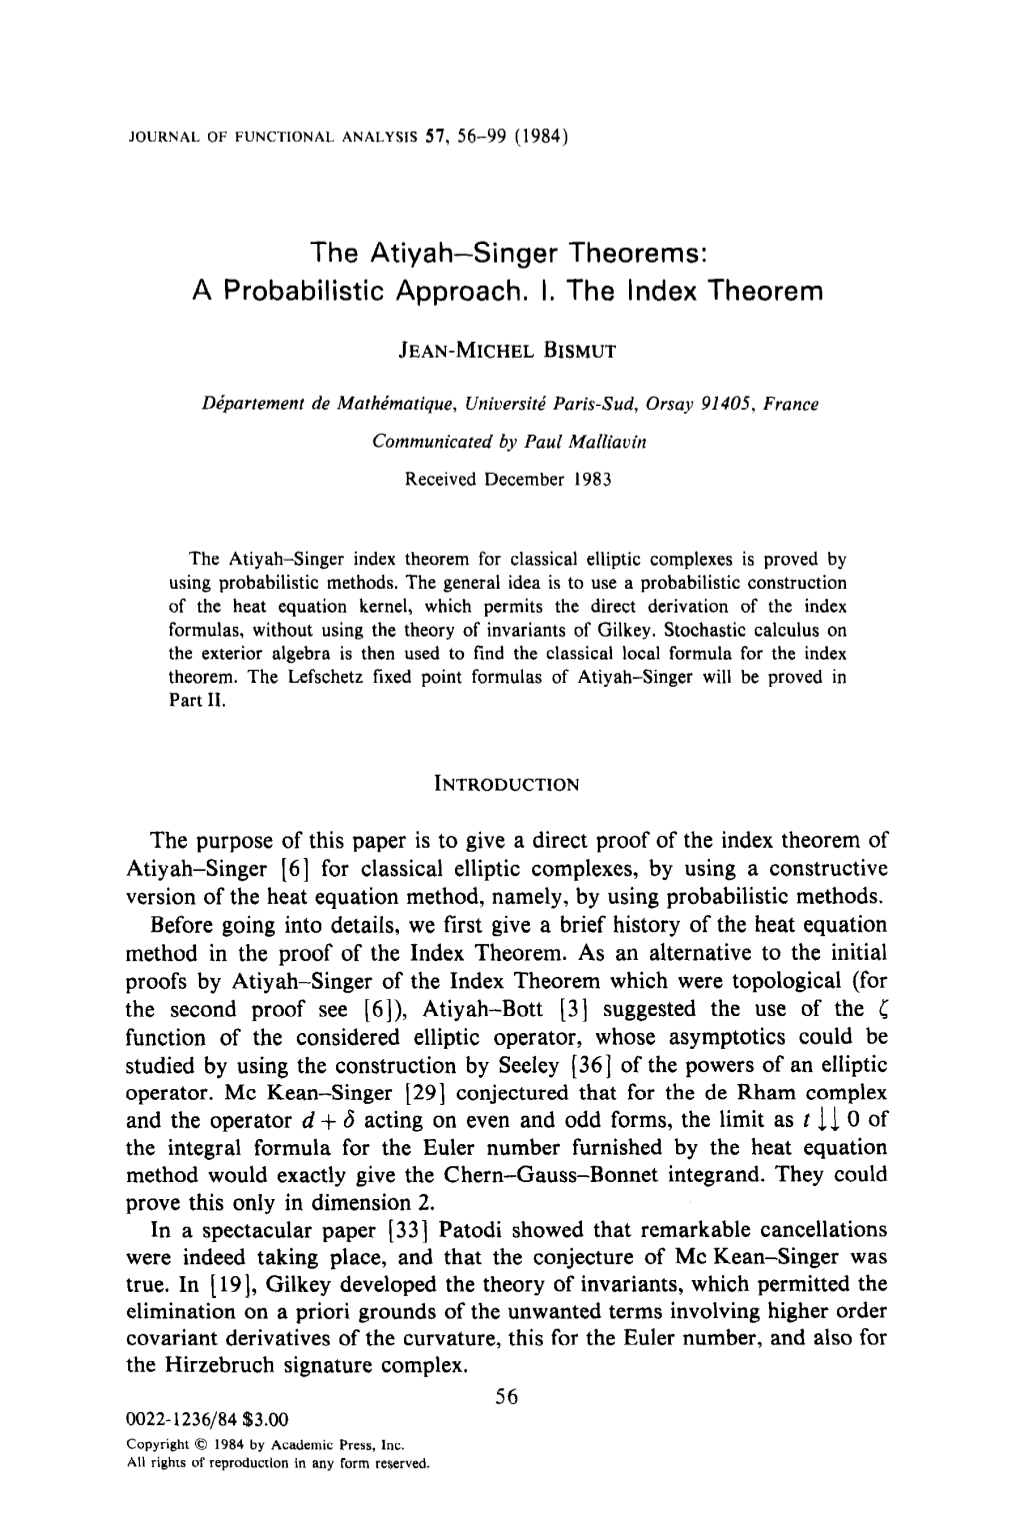 The Atiyah-Singer Theorems: a Probabilistic Approach. I. the Index Theorem